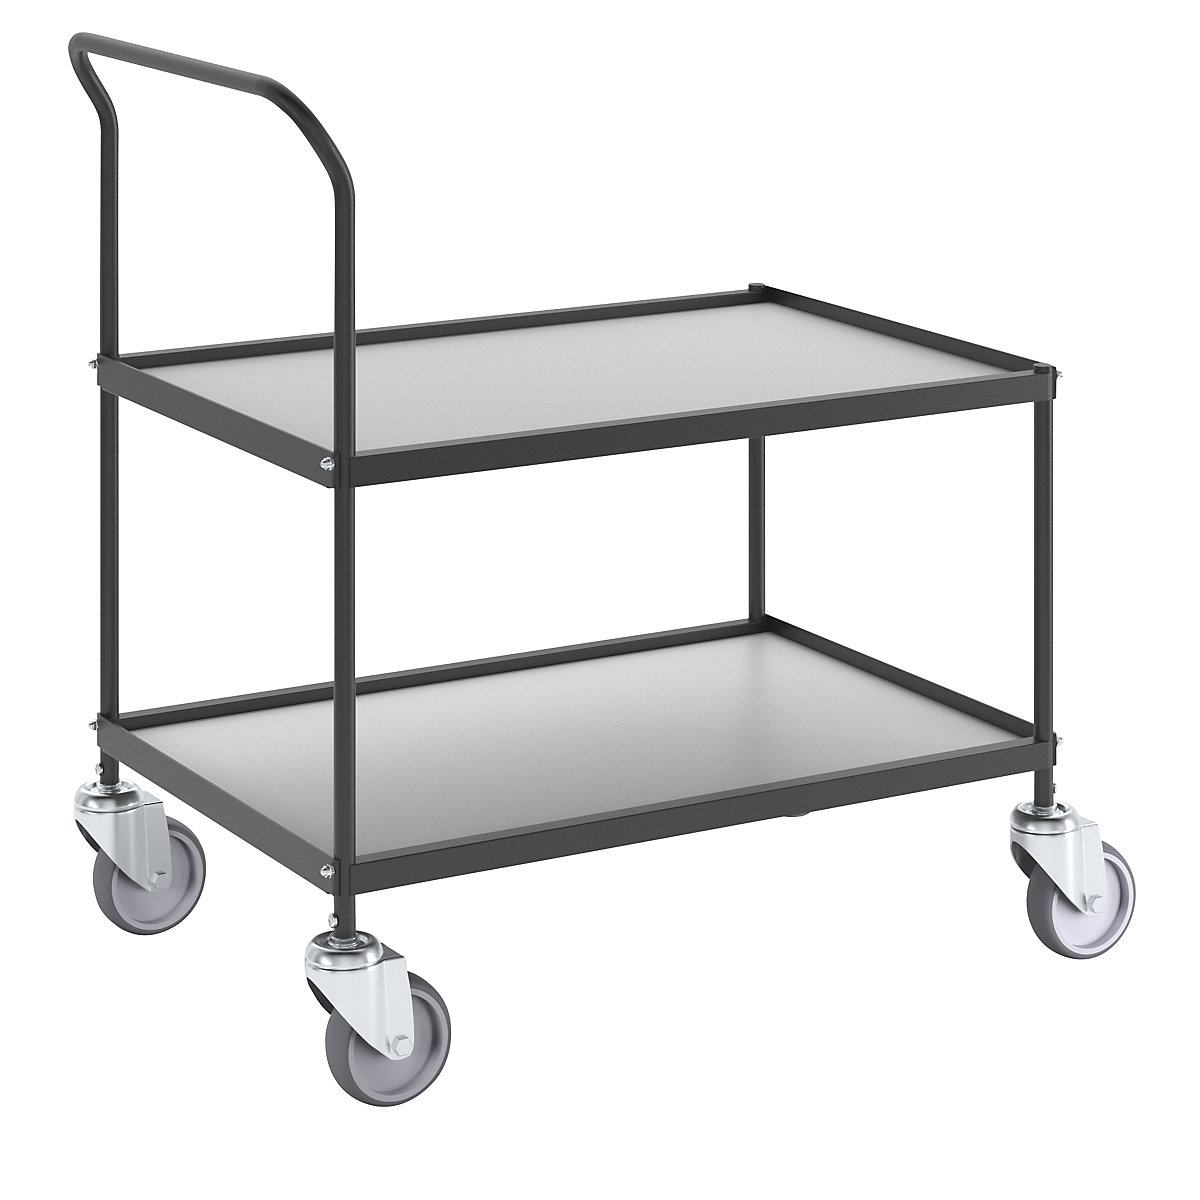 Serving and clearing trolley, 2 shelves, LxWxH 830 x 545 x 920 mm, 2+ items-2